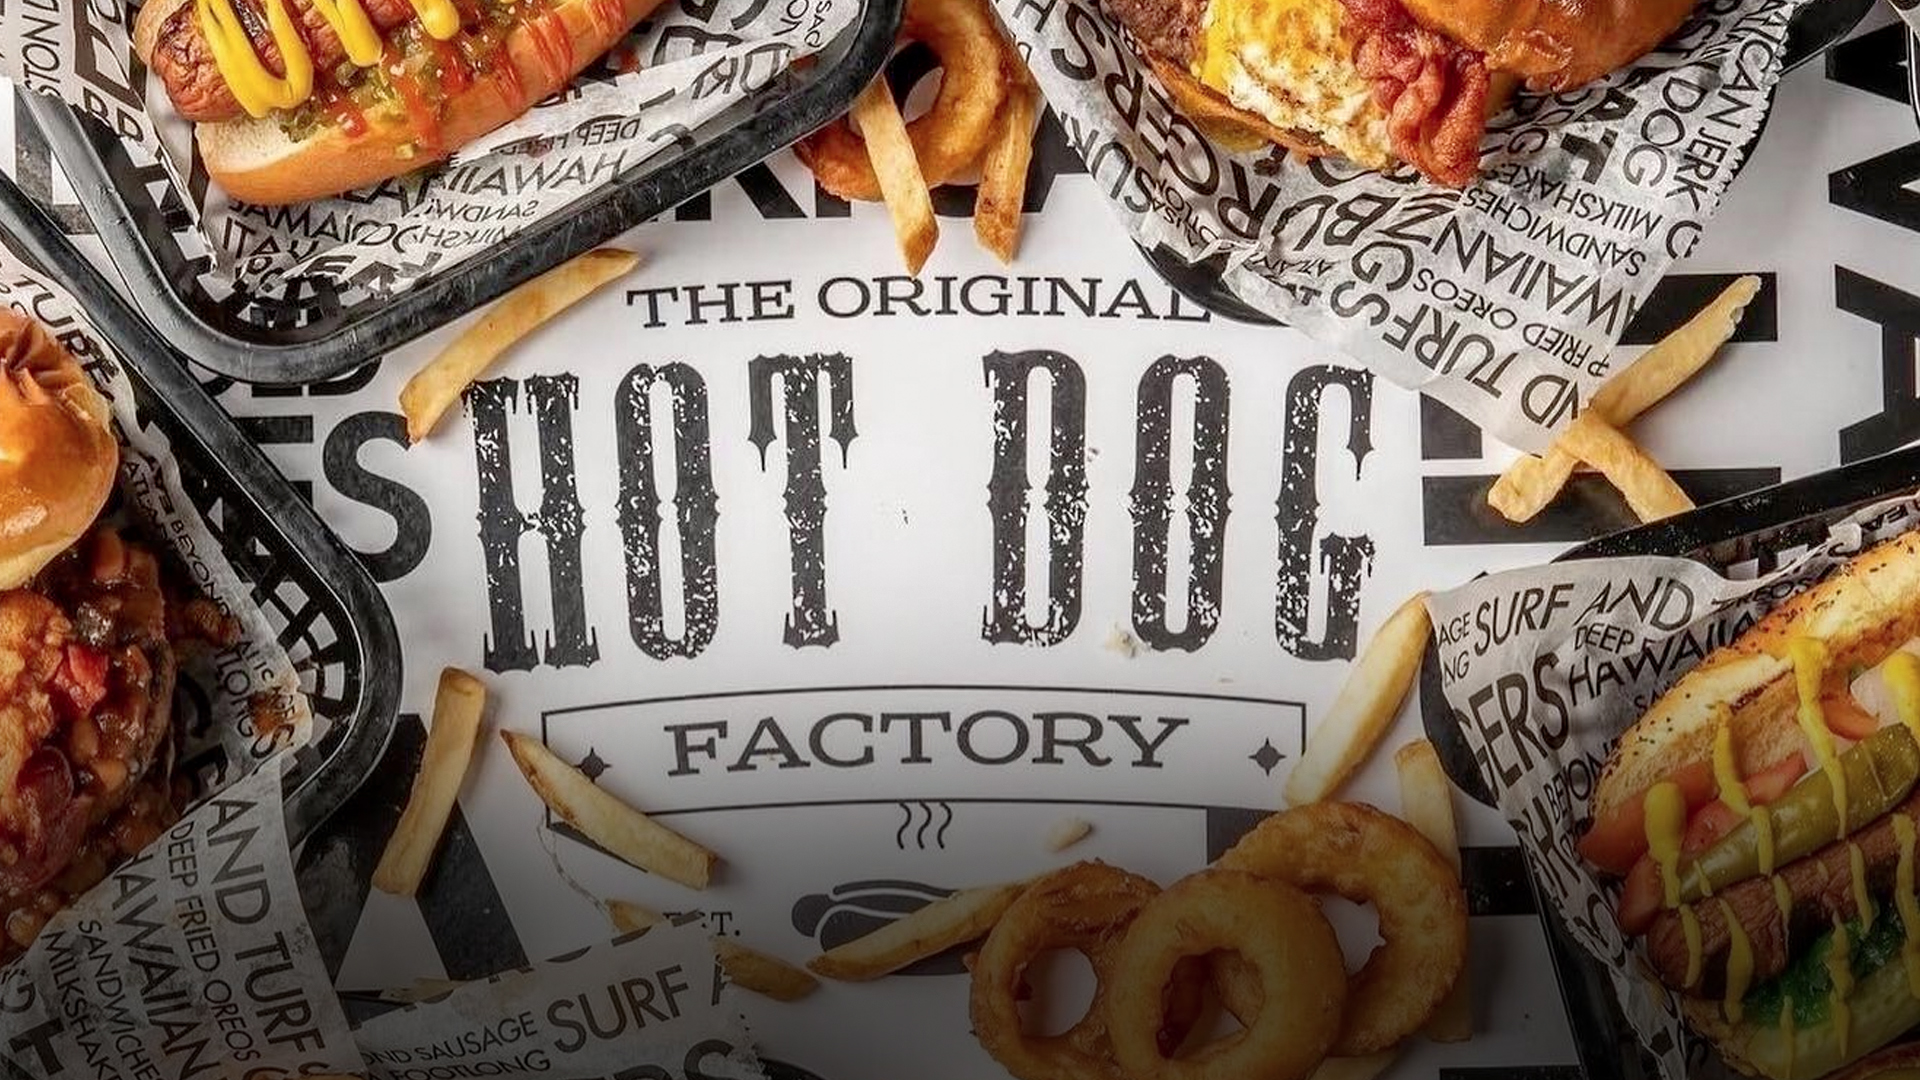 Unleash Your Entrepreneurial Appetite: Why You Should Become an Original Hot Dog Factory Franchisee